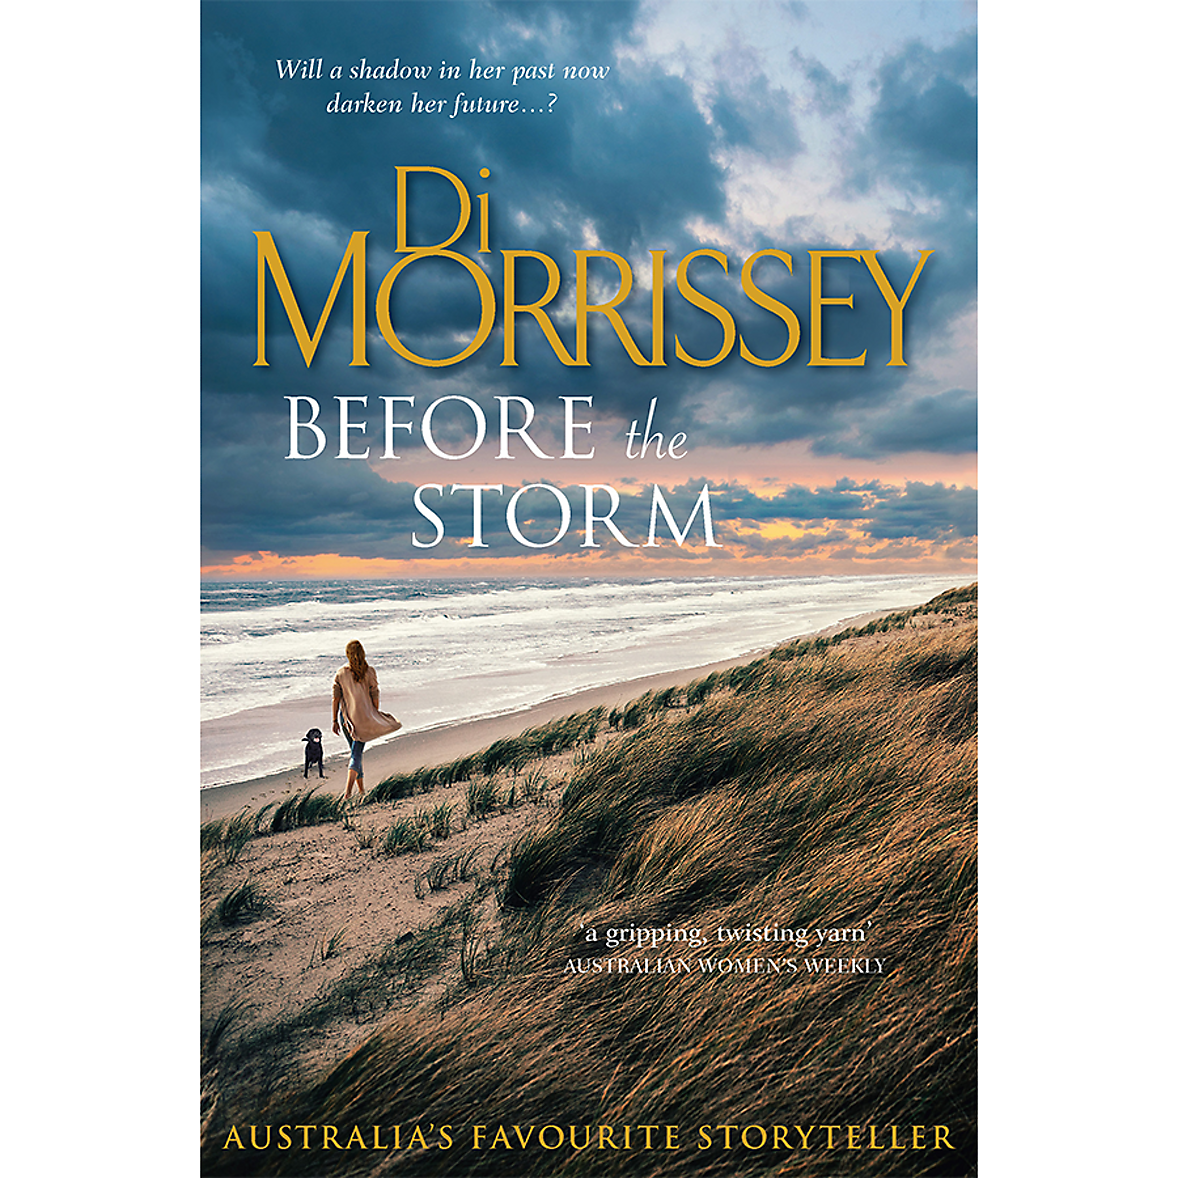 Before the Storm by Di Morrissey